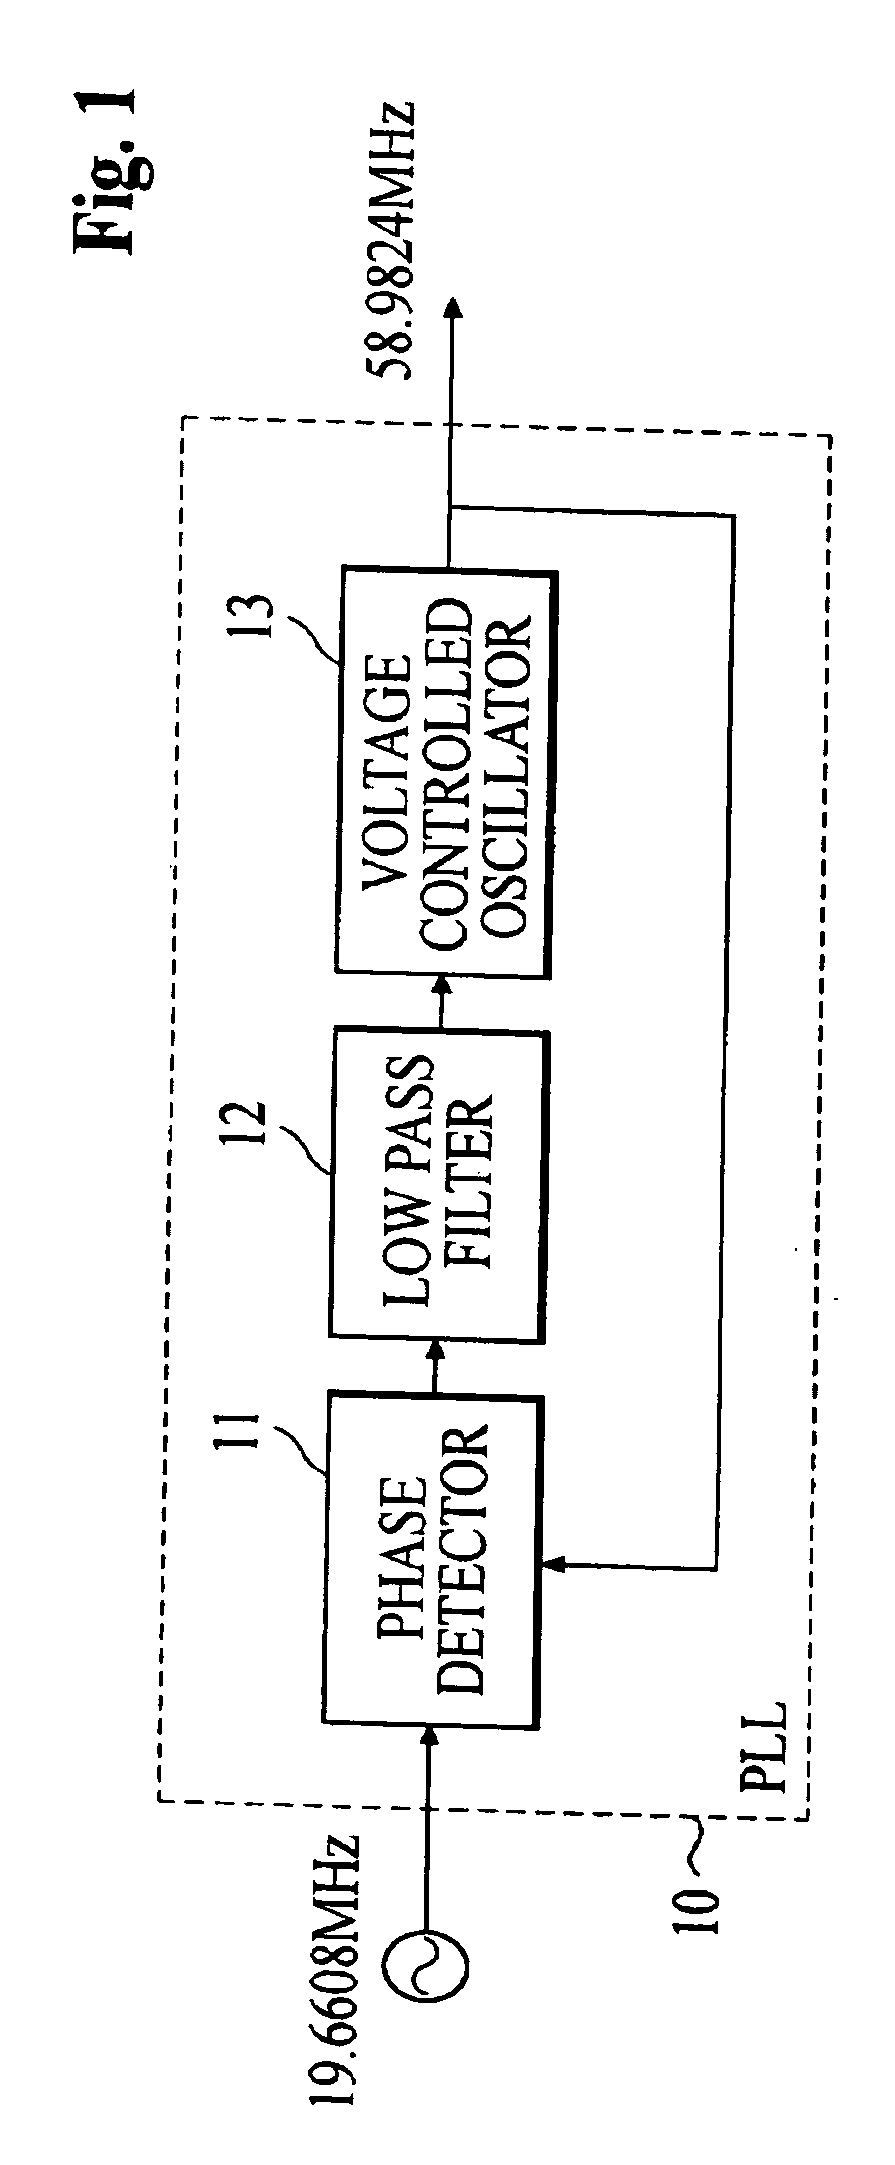 Apparatus for generating clock pulses using a direct digital synthesizer